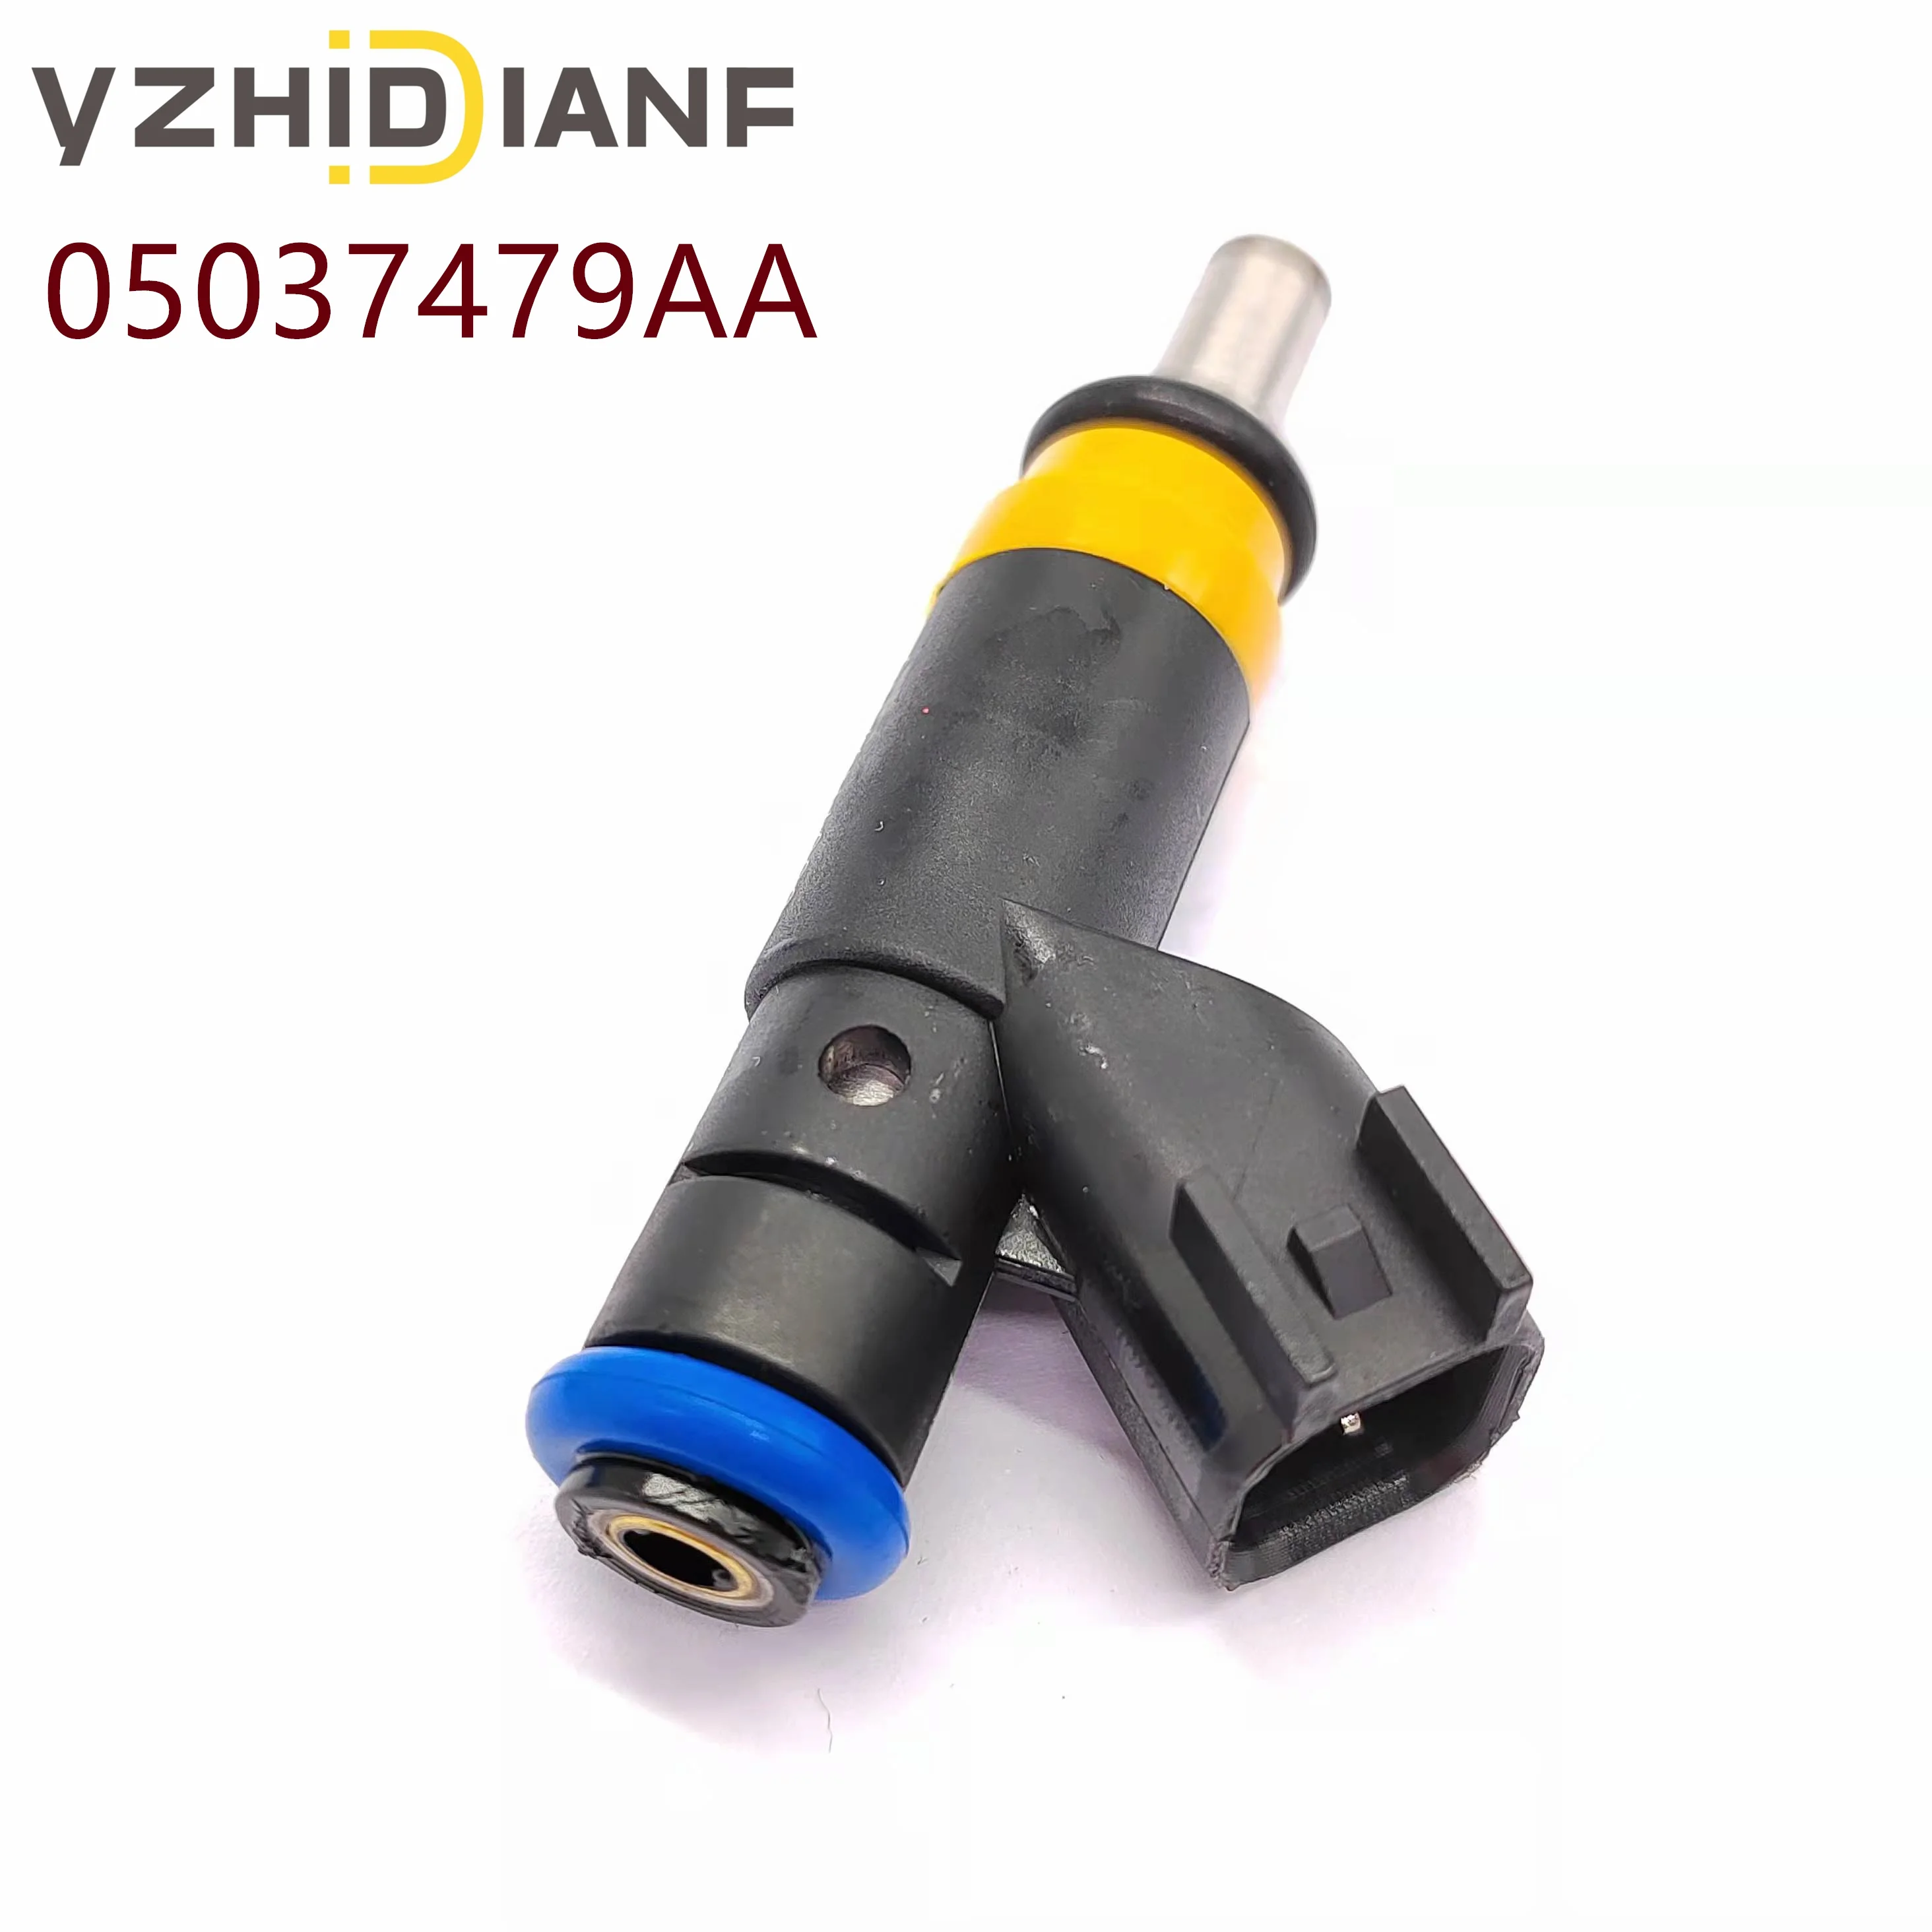 

1x high quality 4 Hole Upgrade Fuel Injectors 05037479AA 5037479AC for Chrysler--300 RAM 1500 2500 3500